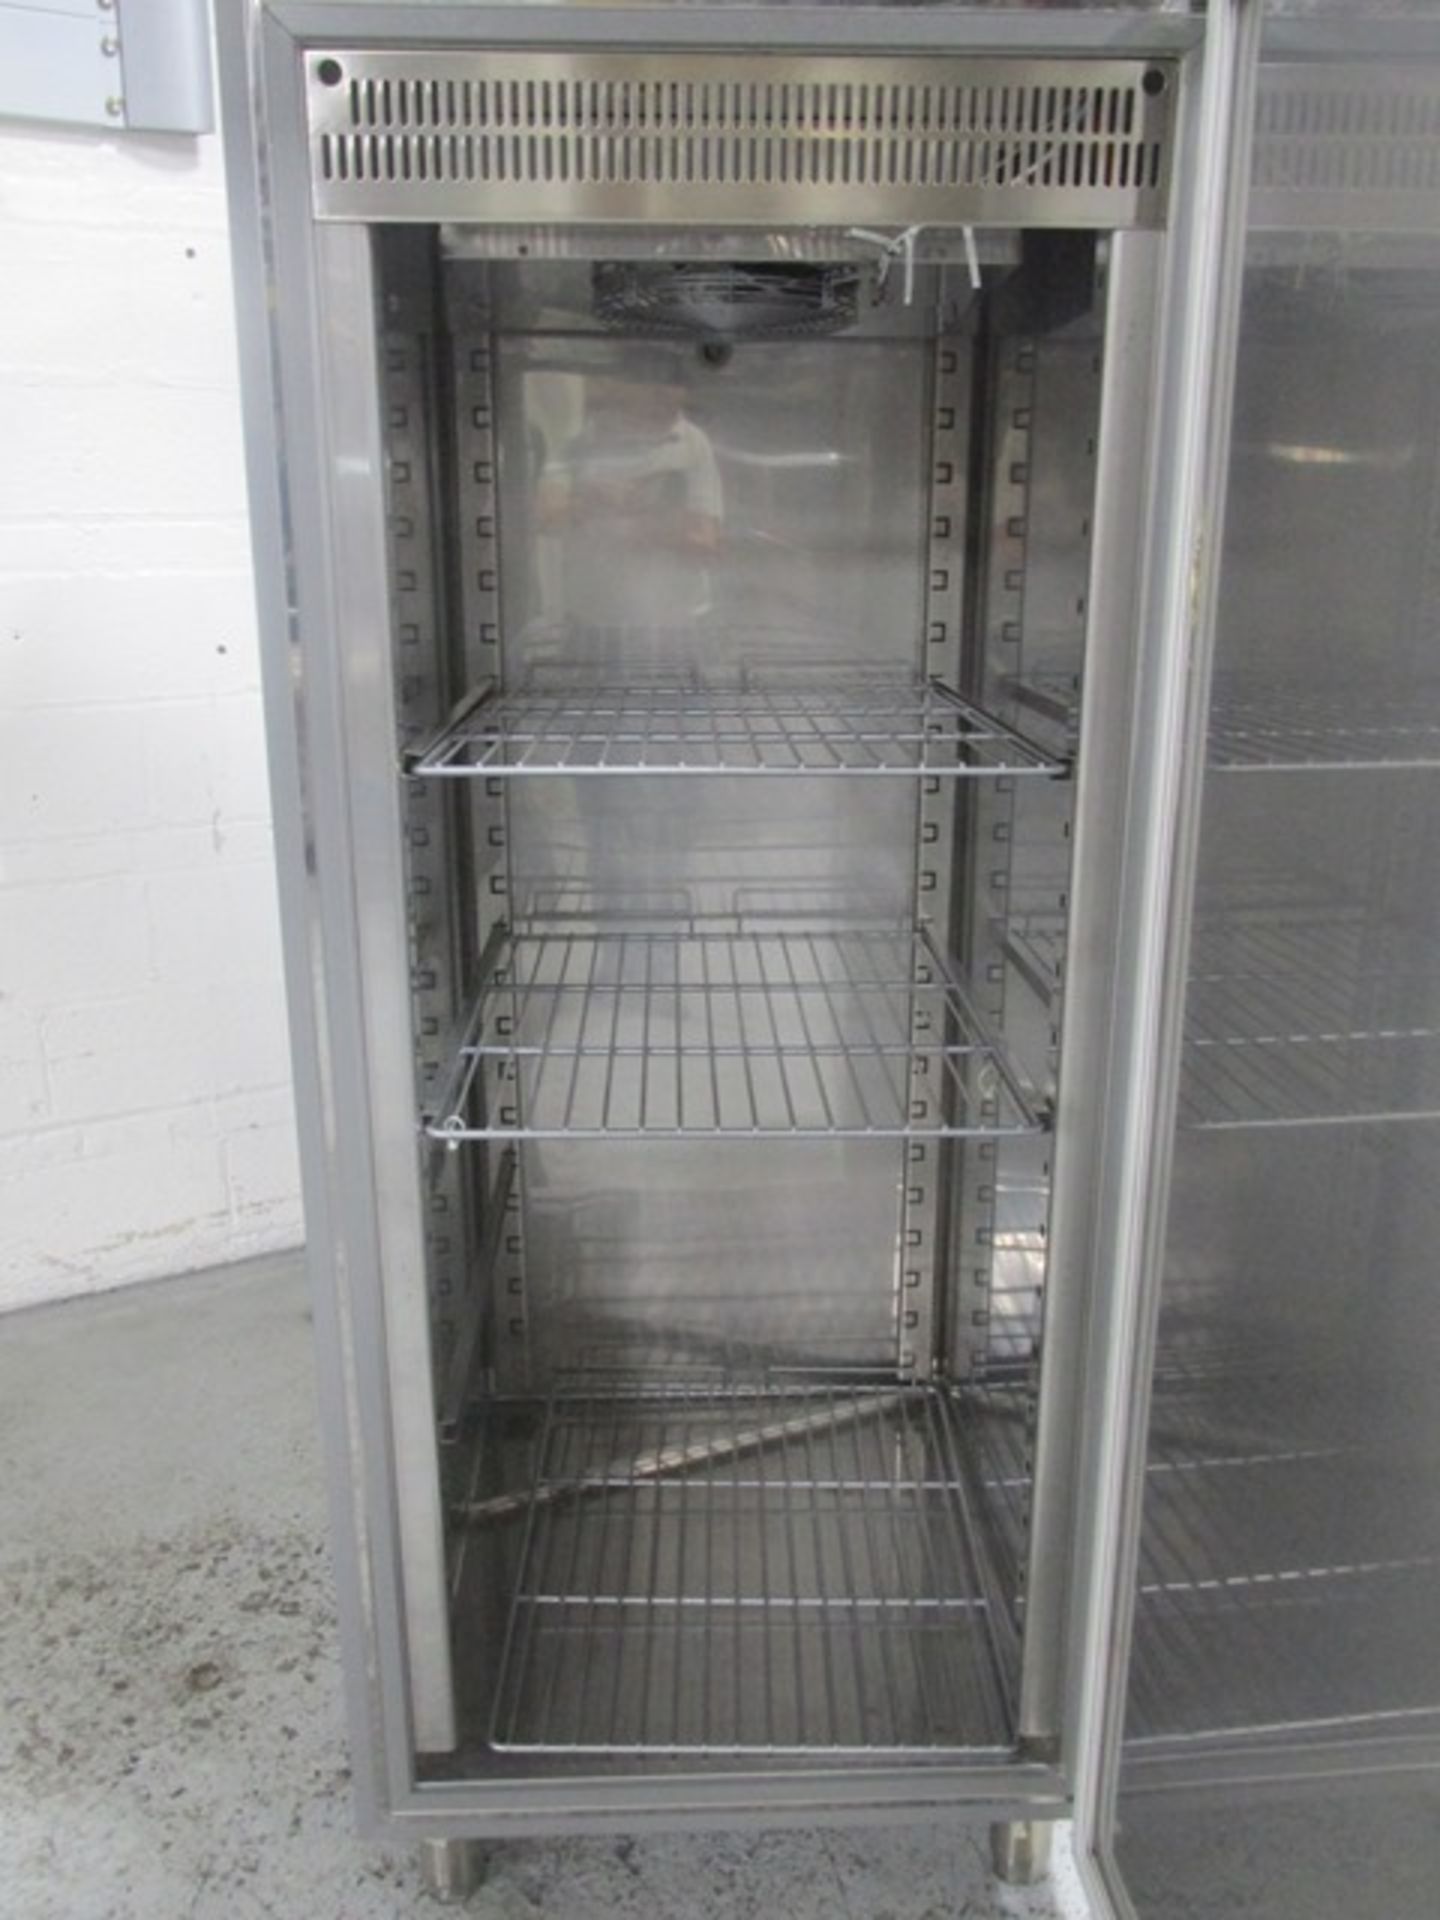 National Incubator, model NTSC625-B, stainless steel interior, 21" wide x 24" deep x 52" high - Image 4 of 6